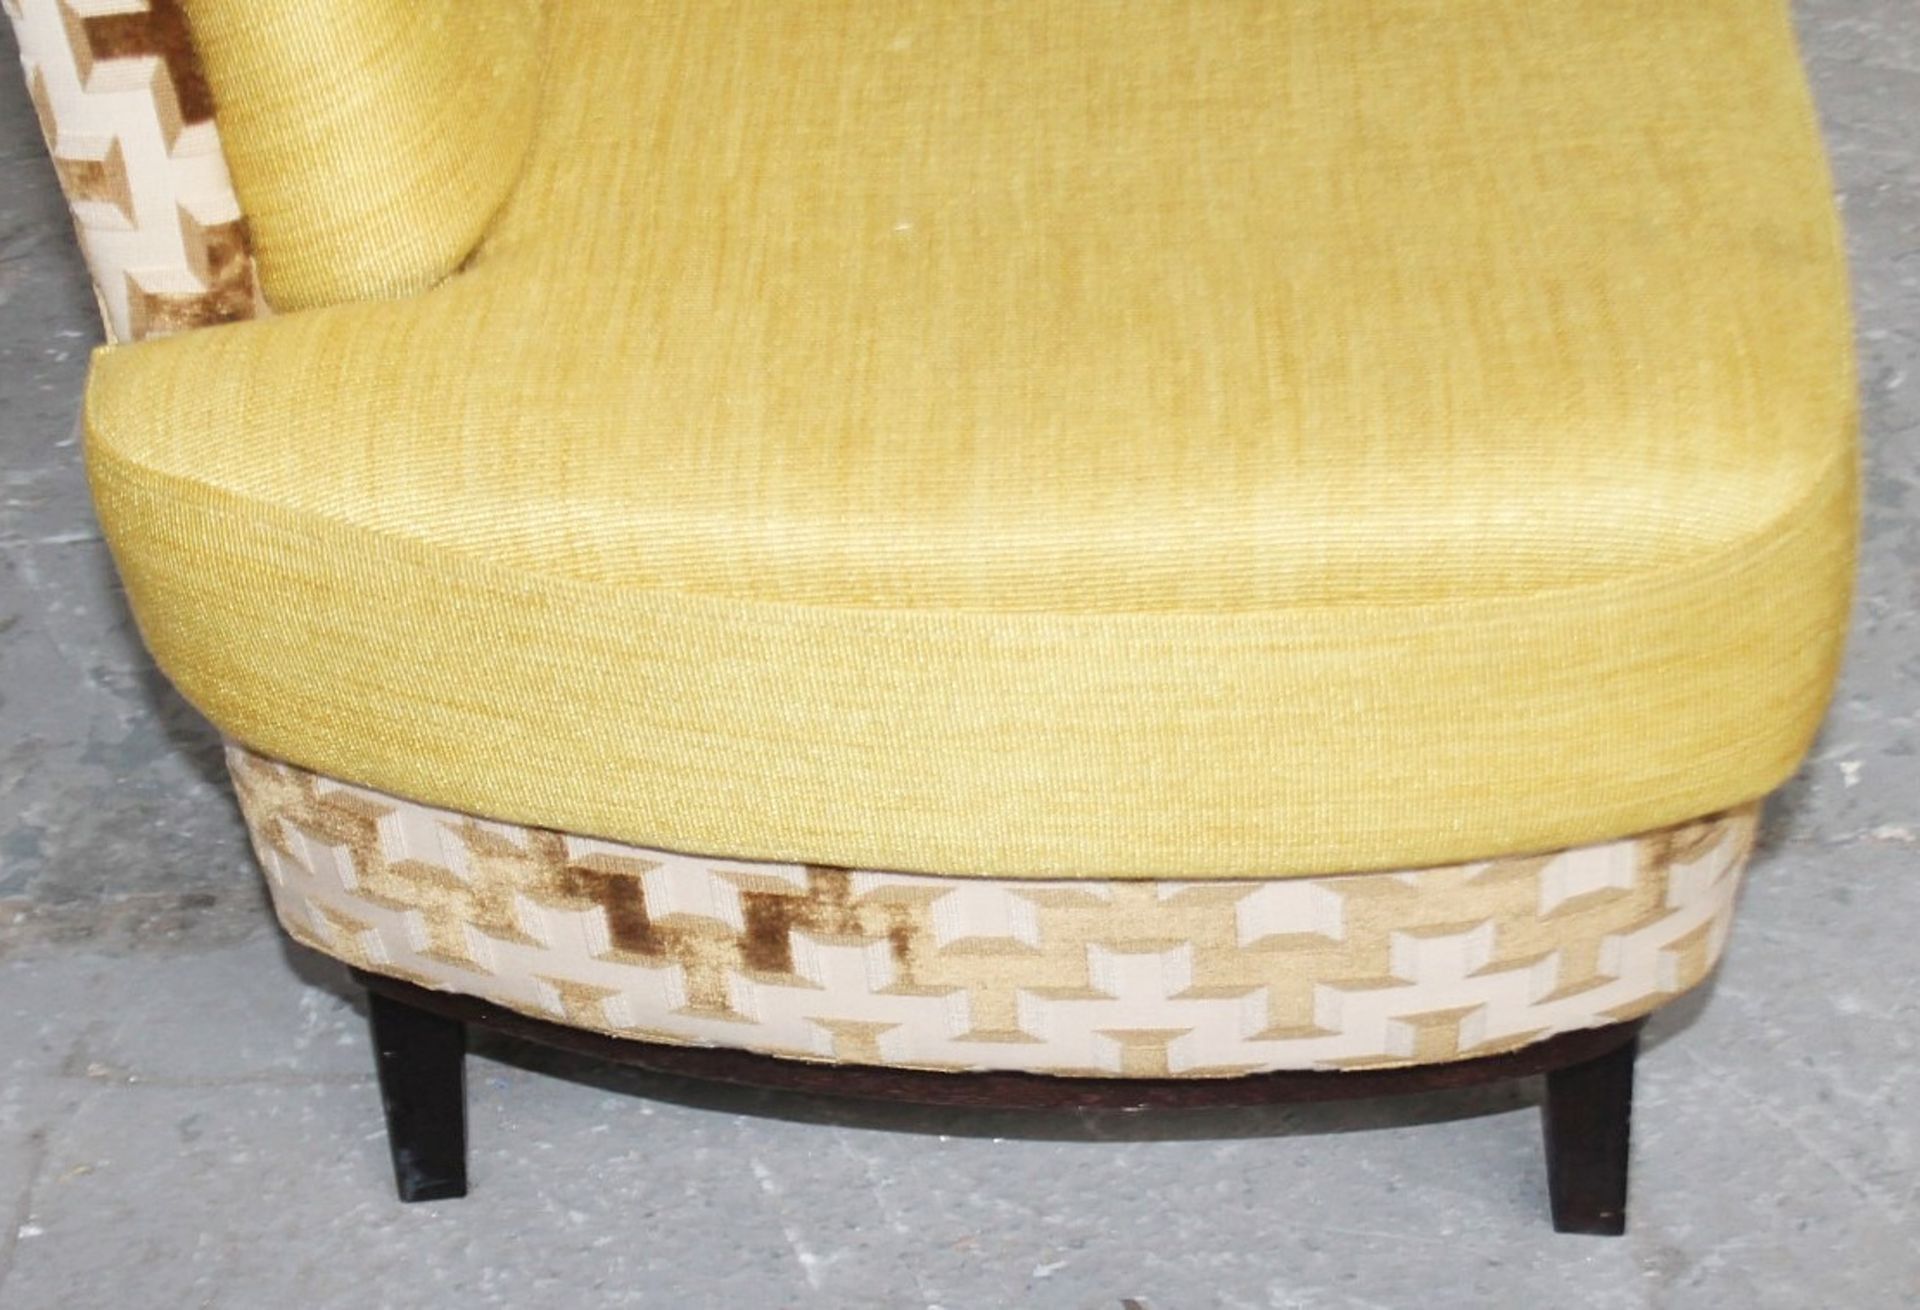 1 x Commercial Freestanding Right-Hand 2-Seater Bench, Upholstered In Premium Gold-Coloured Fabrics, - Image 8 of 9